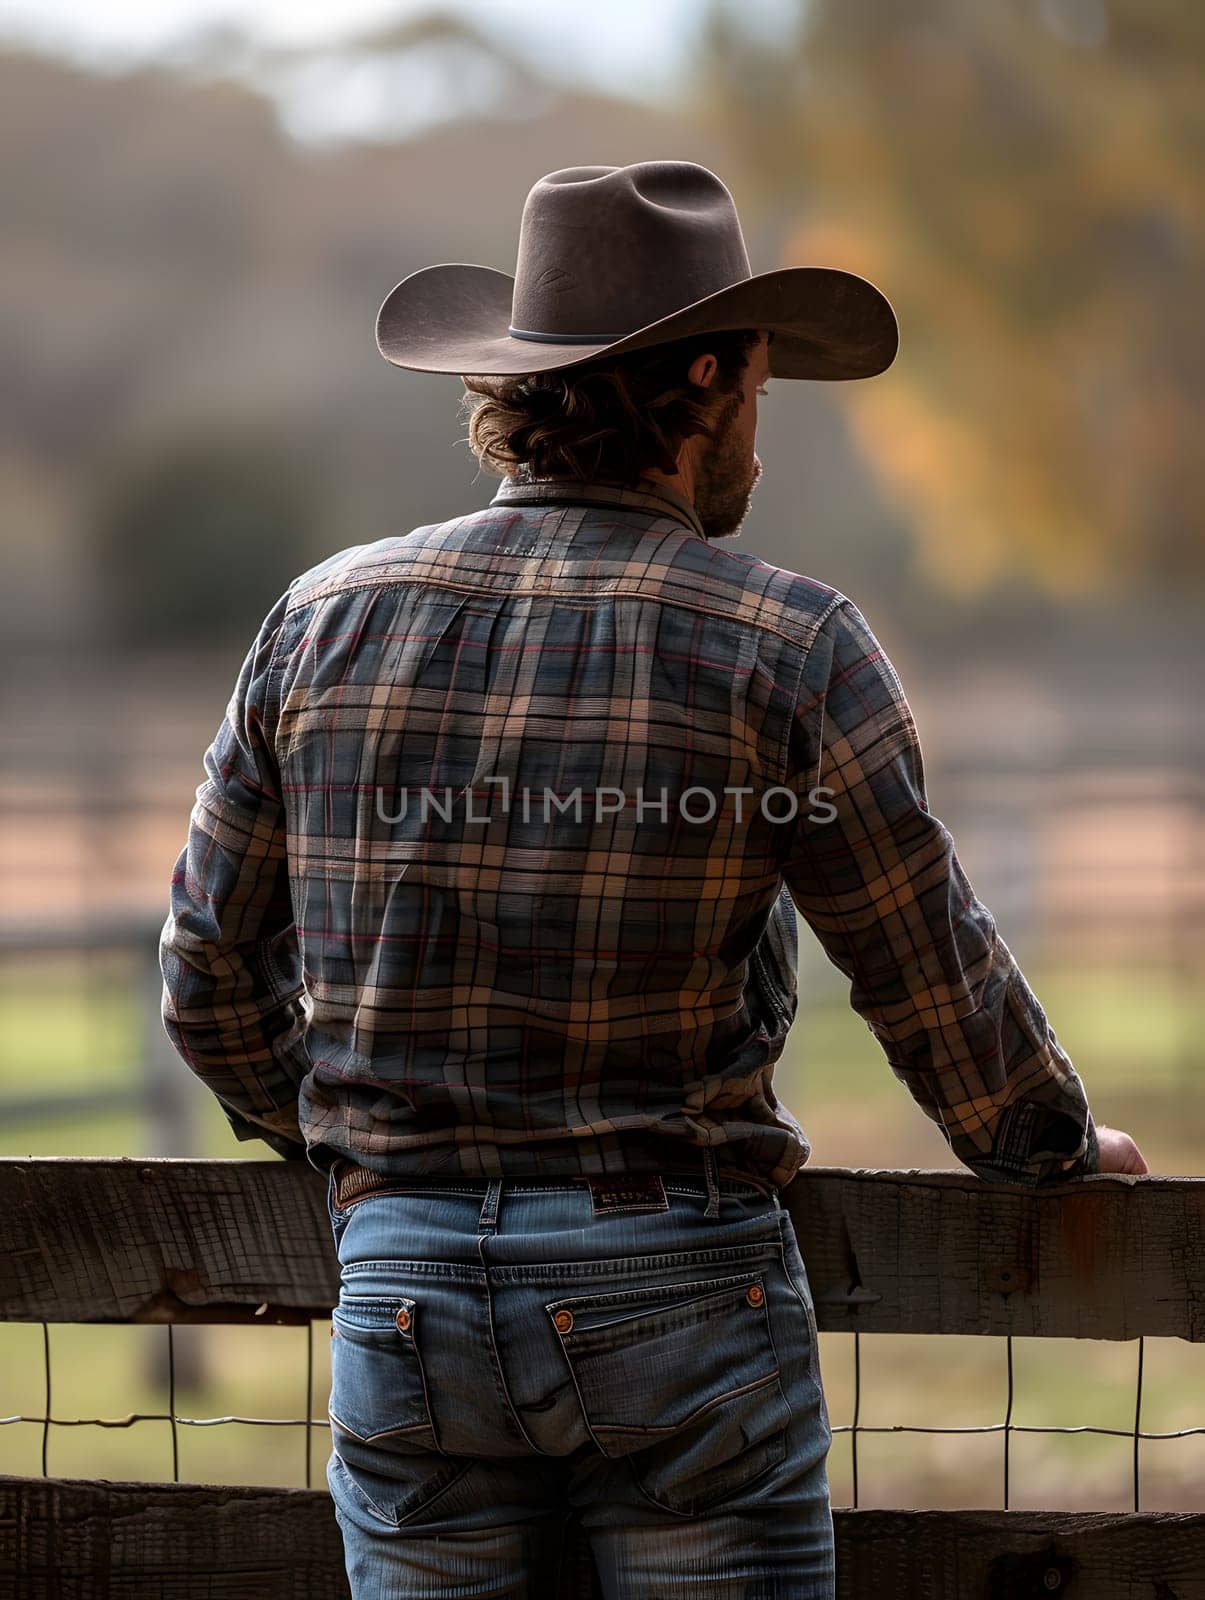 A man in jeans and a dress shirt is leaning on a wooden fence, wearing a cowboy hat and enjoying the landscape in his fedora hat